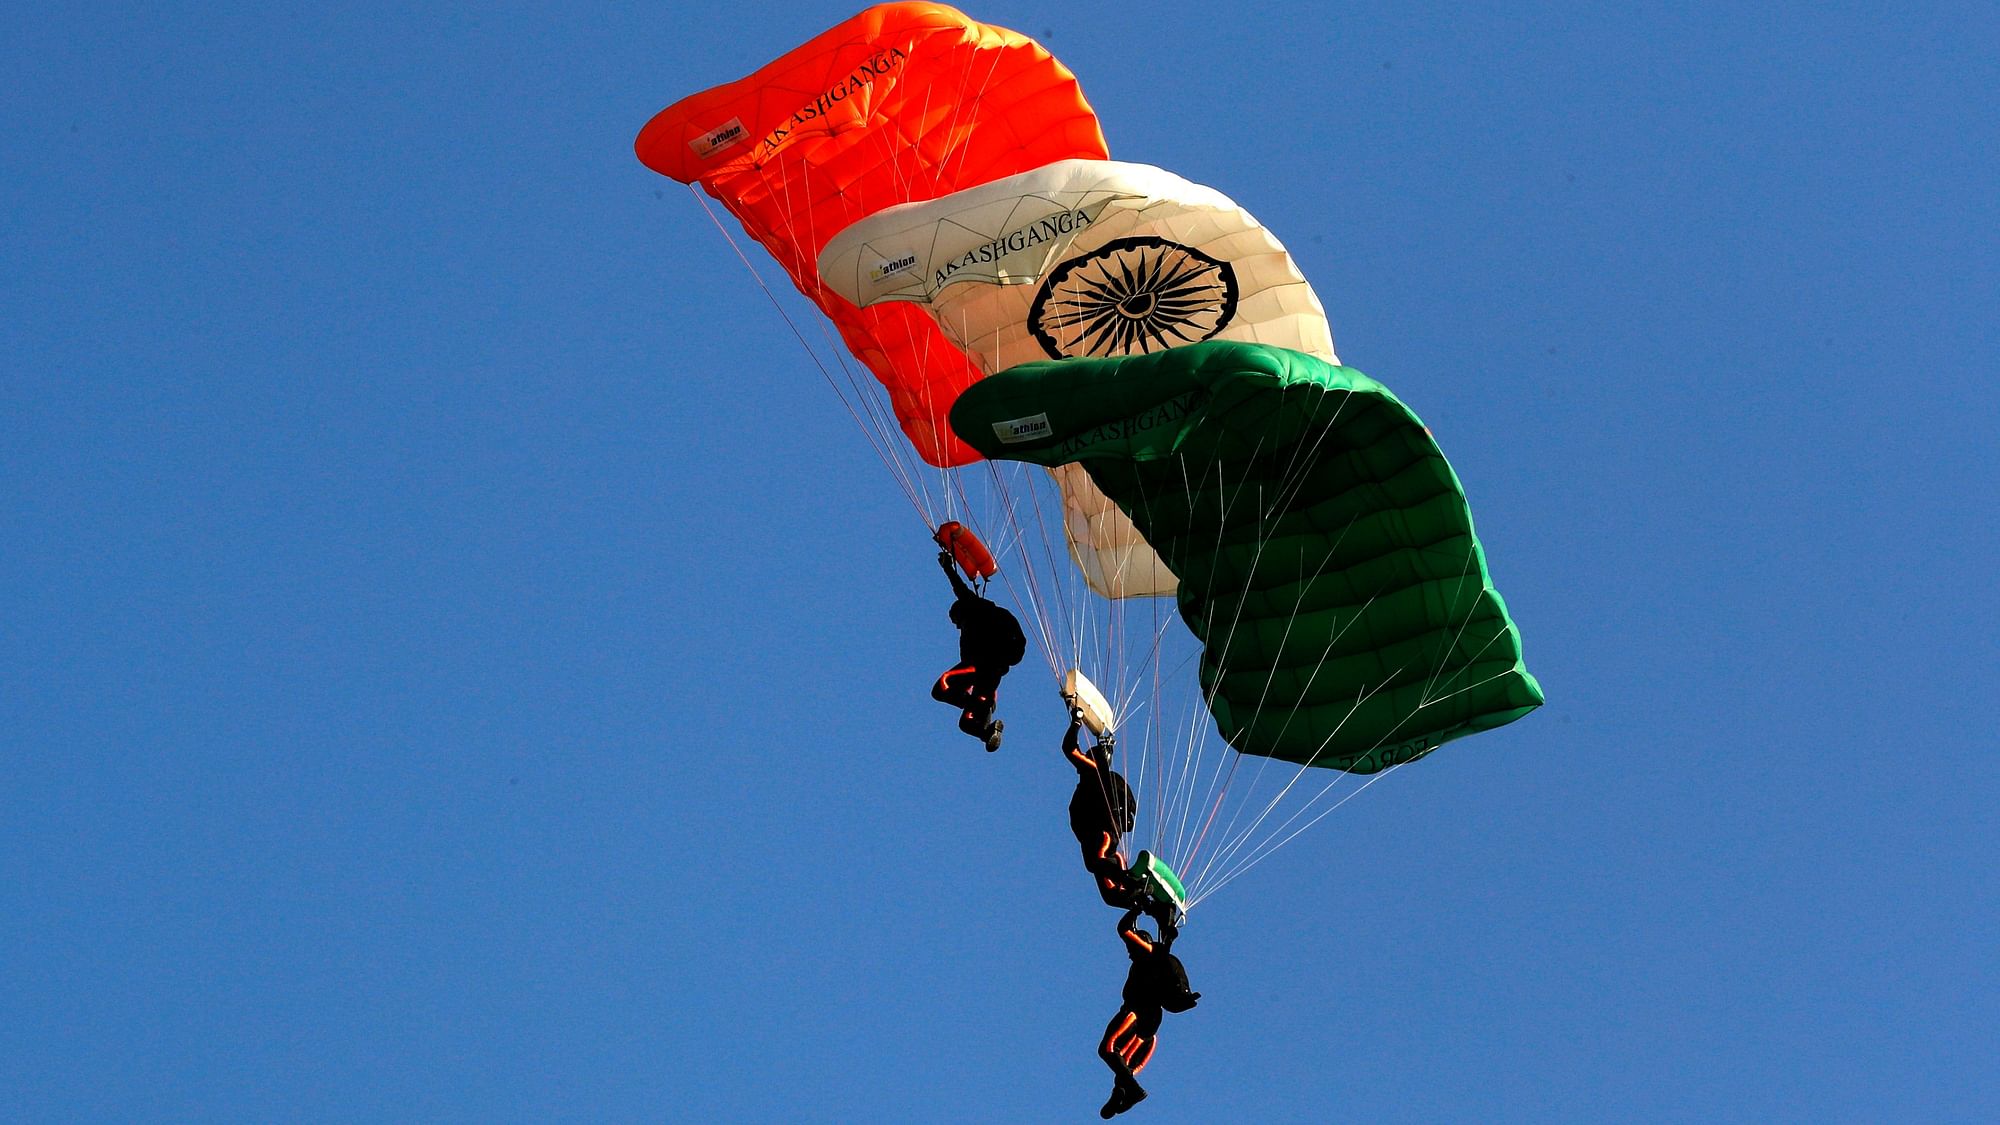 Members of Akash Ganga sky diving team of the Indian Air Force display their skill during the Air Force Day parade at the Hindon air base on the outskirts of New Delhi on Tuesday, 8 October. 